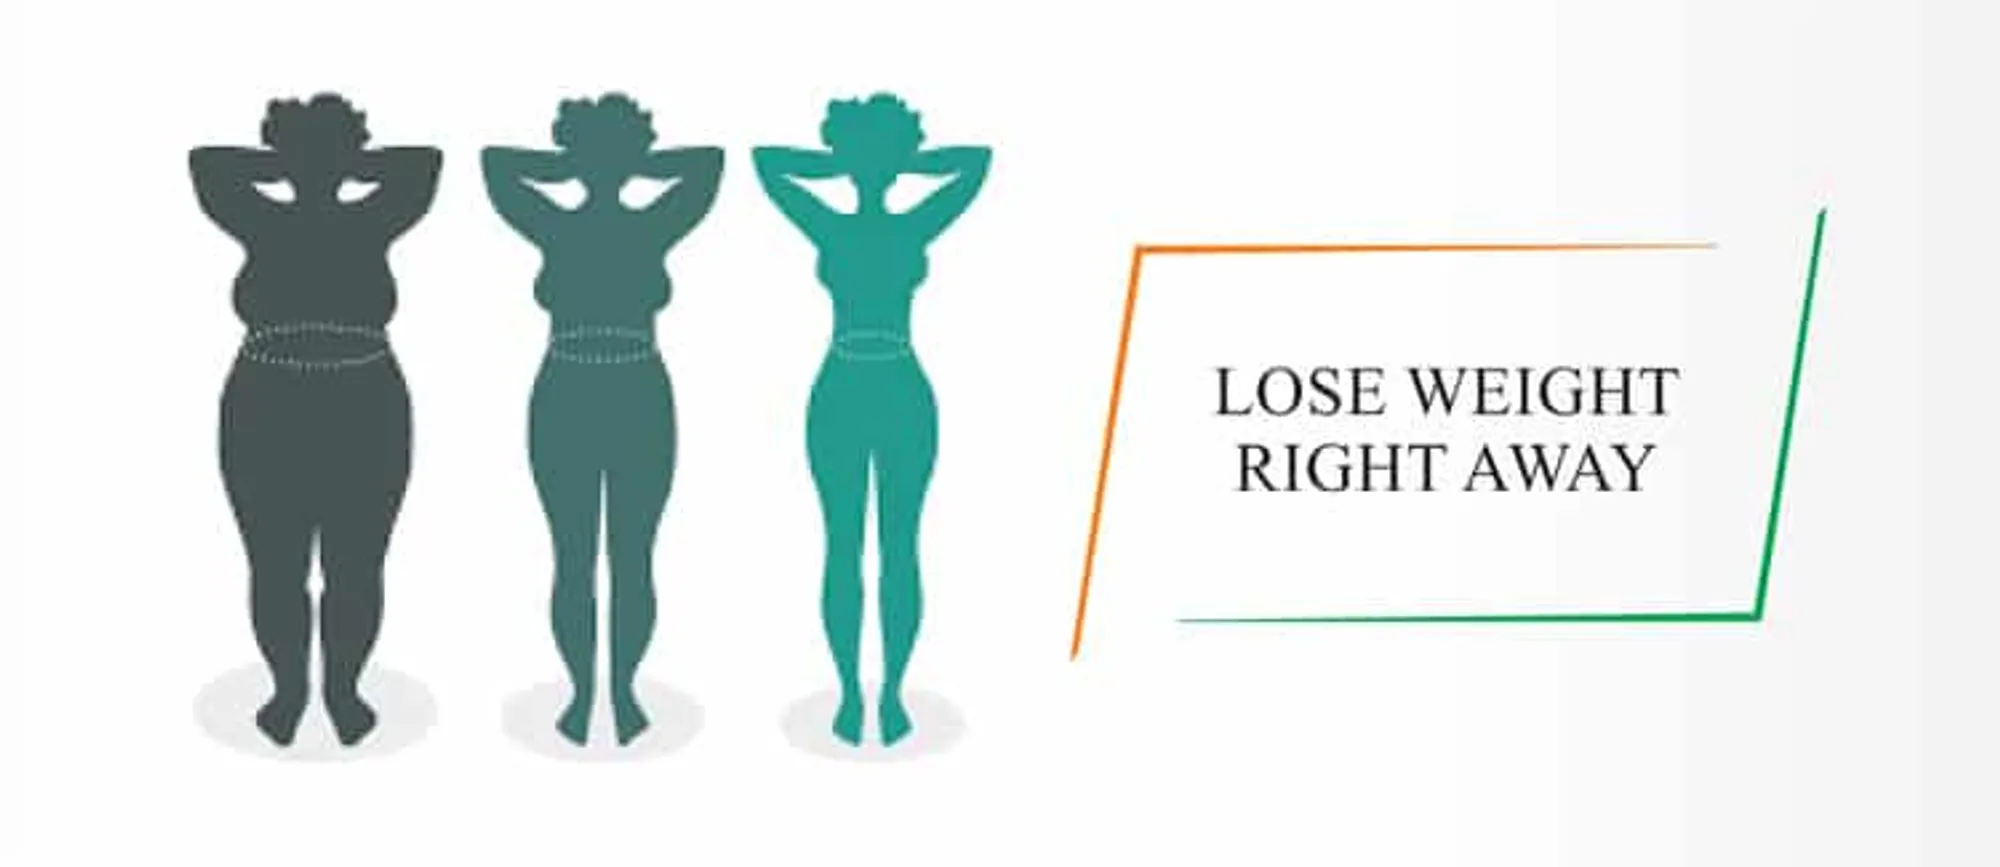 LOSE-WEIGHT-RIGHT-AWAY